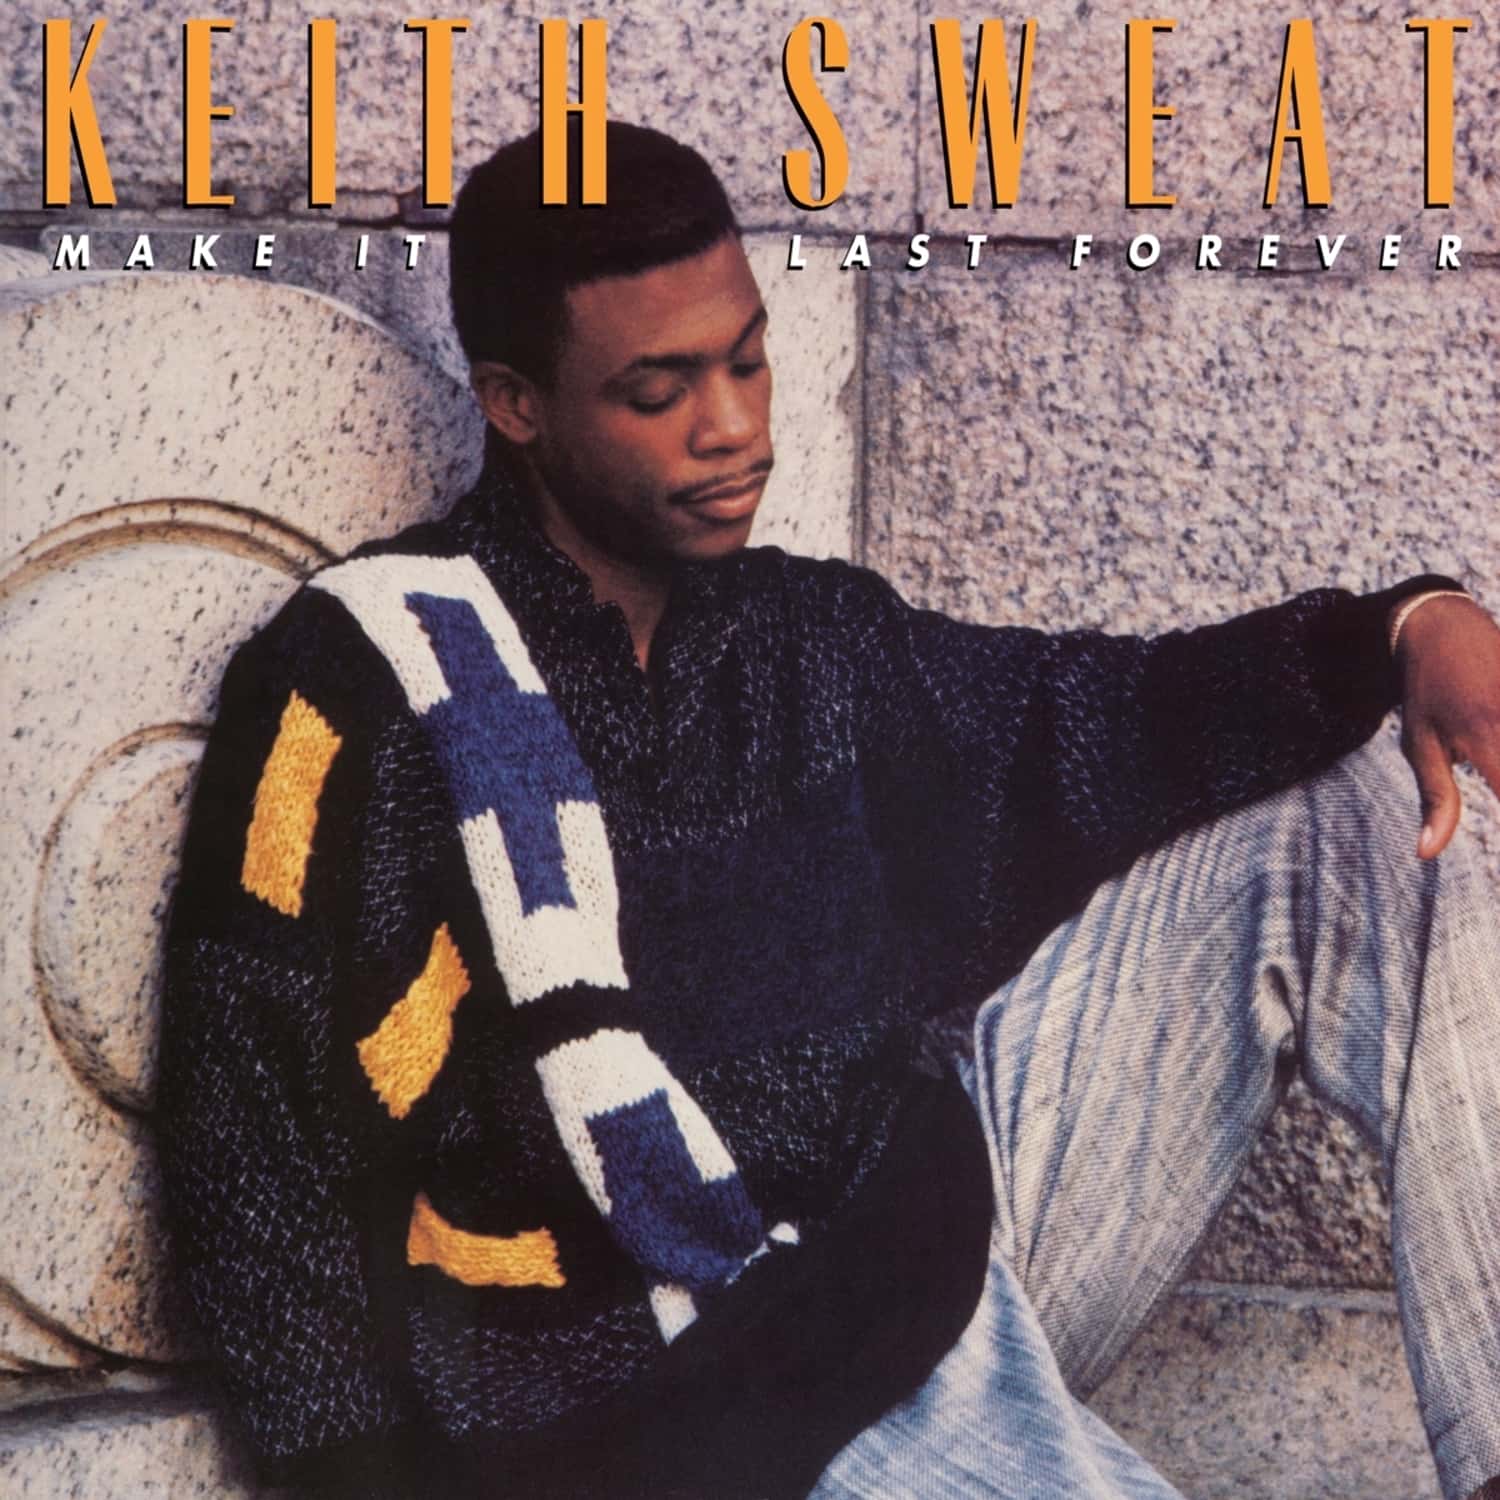 Keith Sweat - MAKE IT LAST FOREVER 